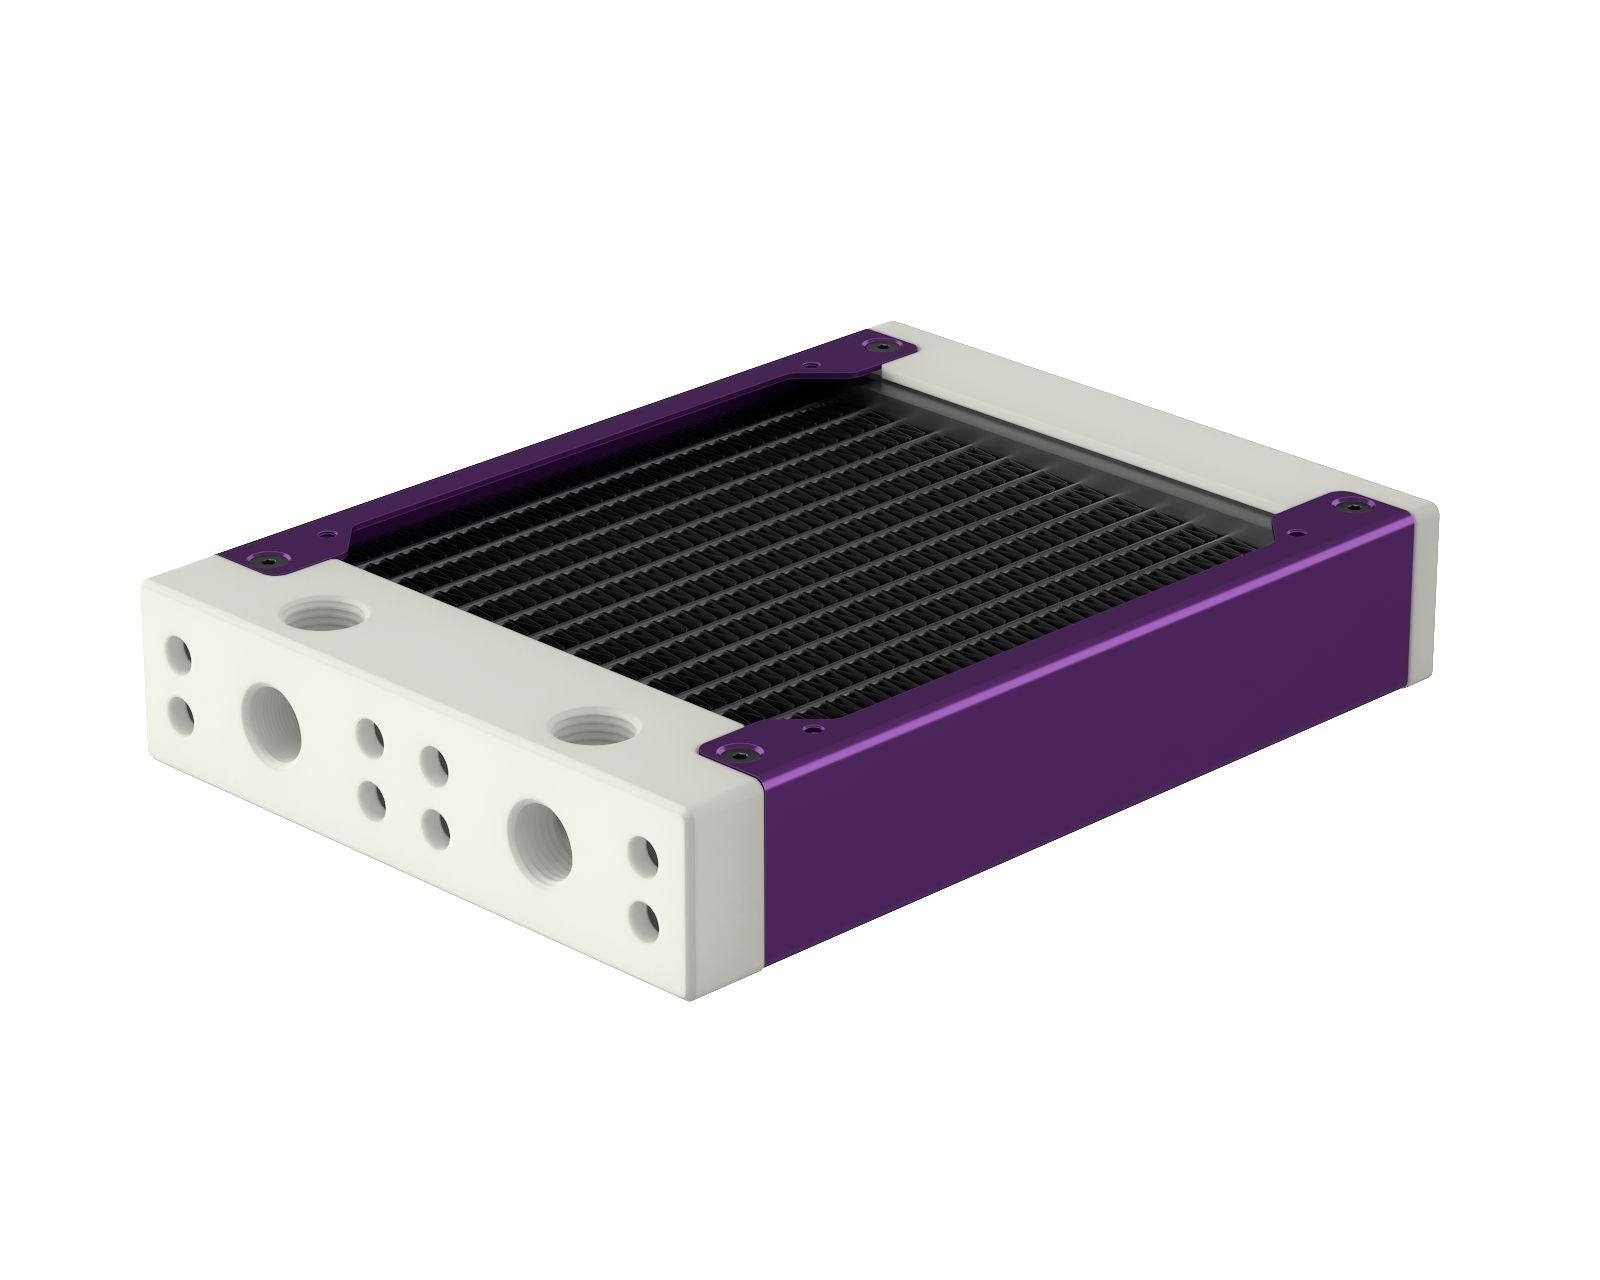 PrimoChill 120SL (30mm) EXIMO Modular Radiator, White POM, 1x120mm, Single Fan (R-SL-W12) Available in 20+ Colors, Assembled in USA and Custom Watercooling Loop Ready - Candy Purple